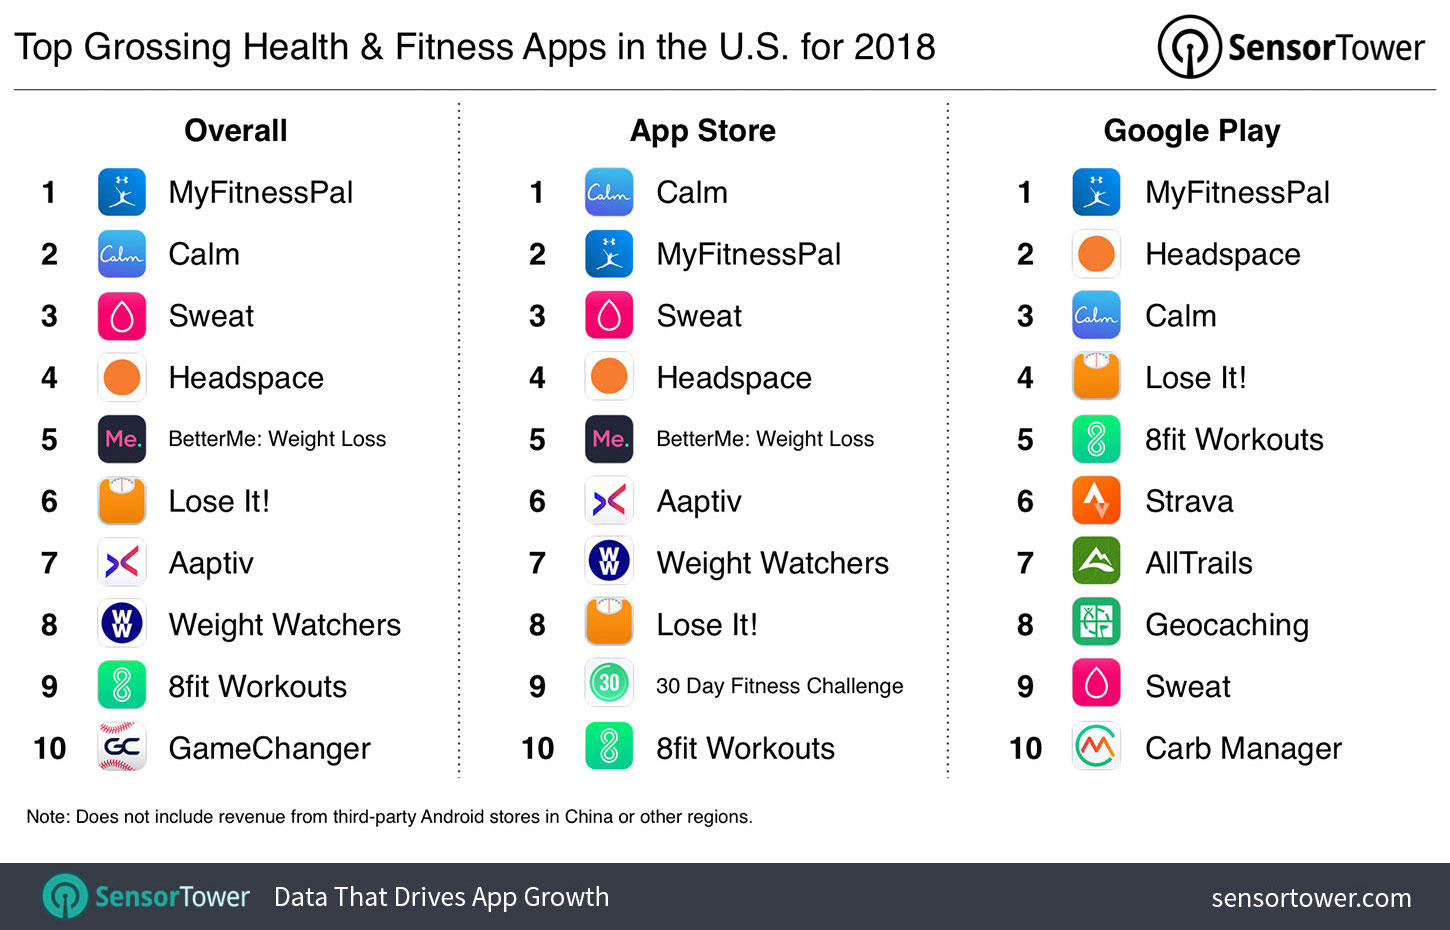 Top Grossing Health & Fitness Apps in the U.S. for 2018